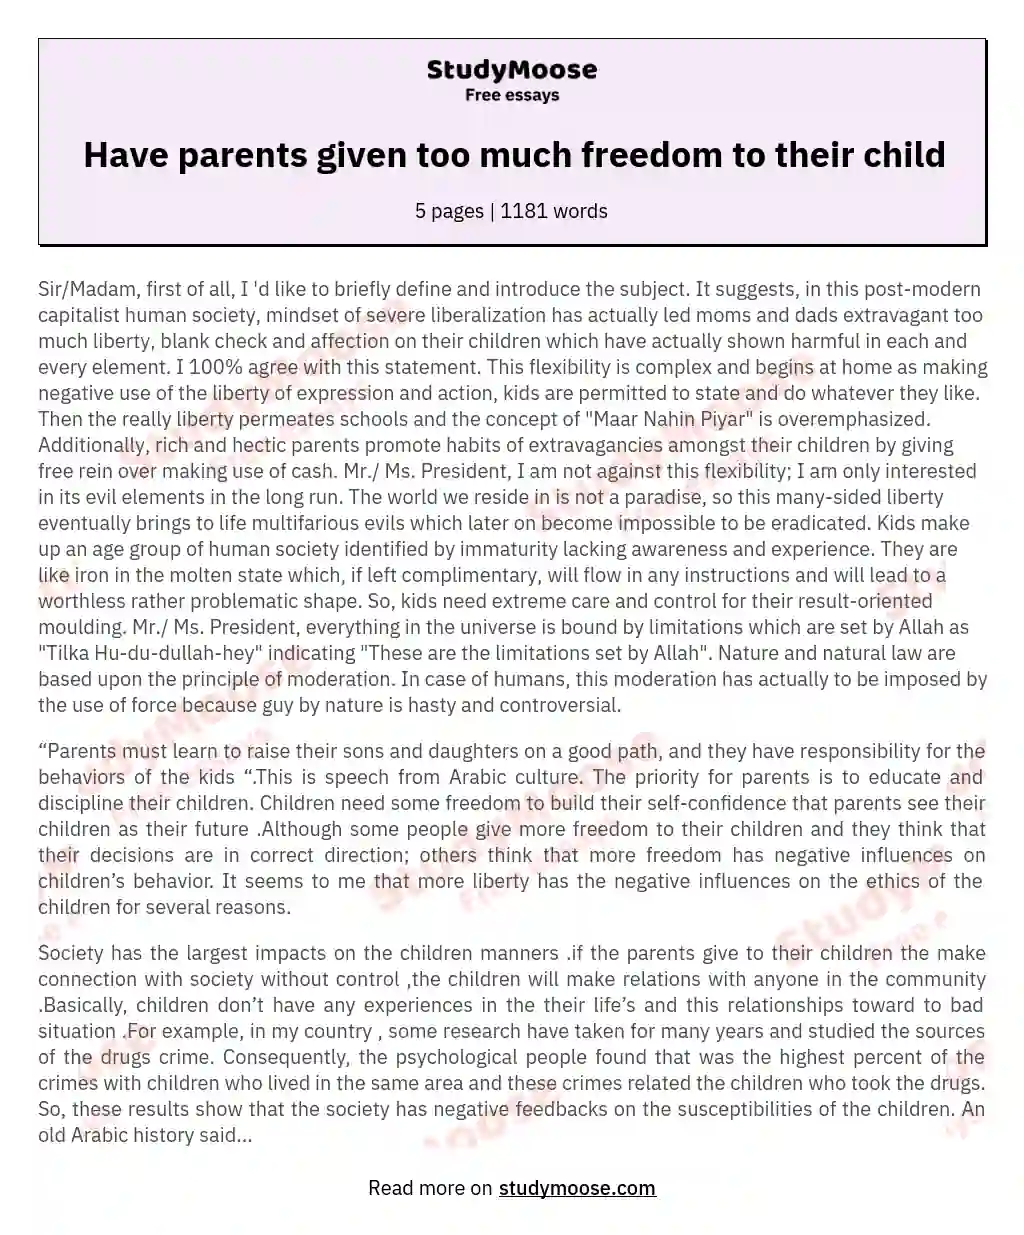 Have parents given too much freedom to their child essay